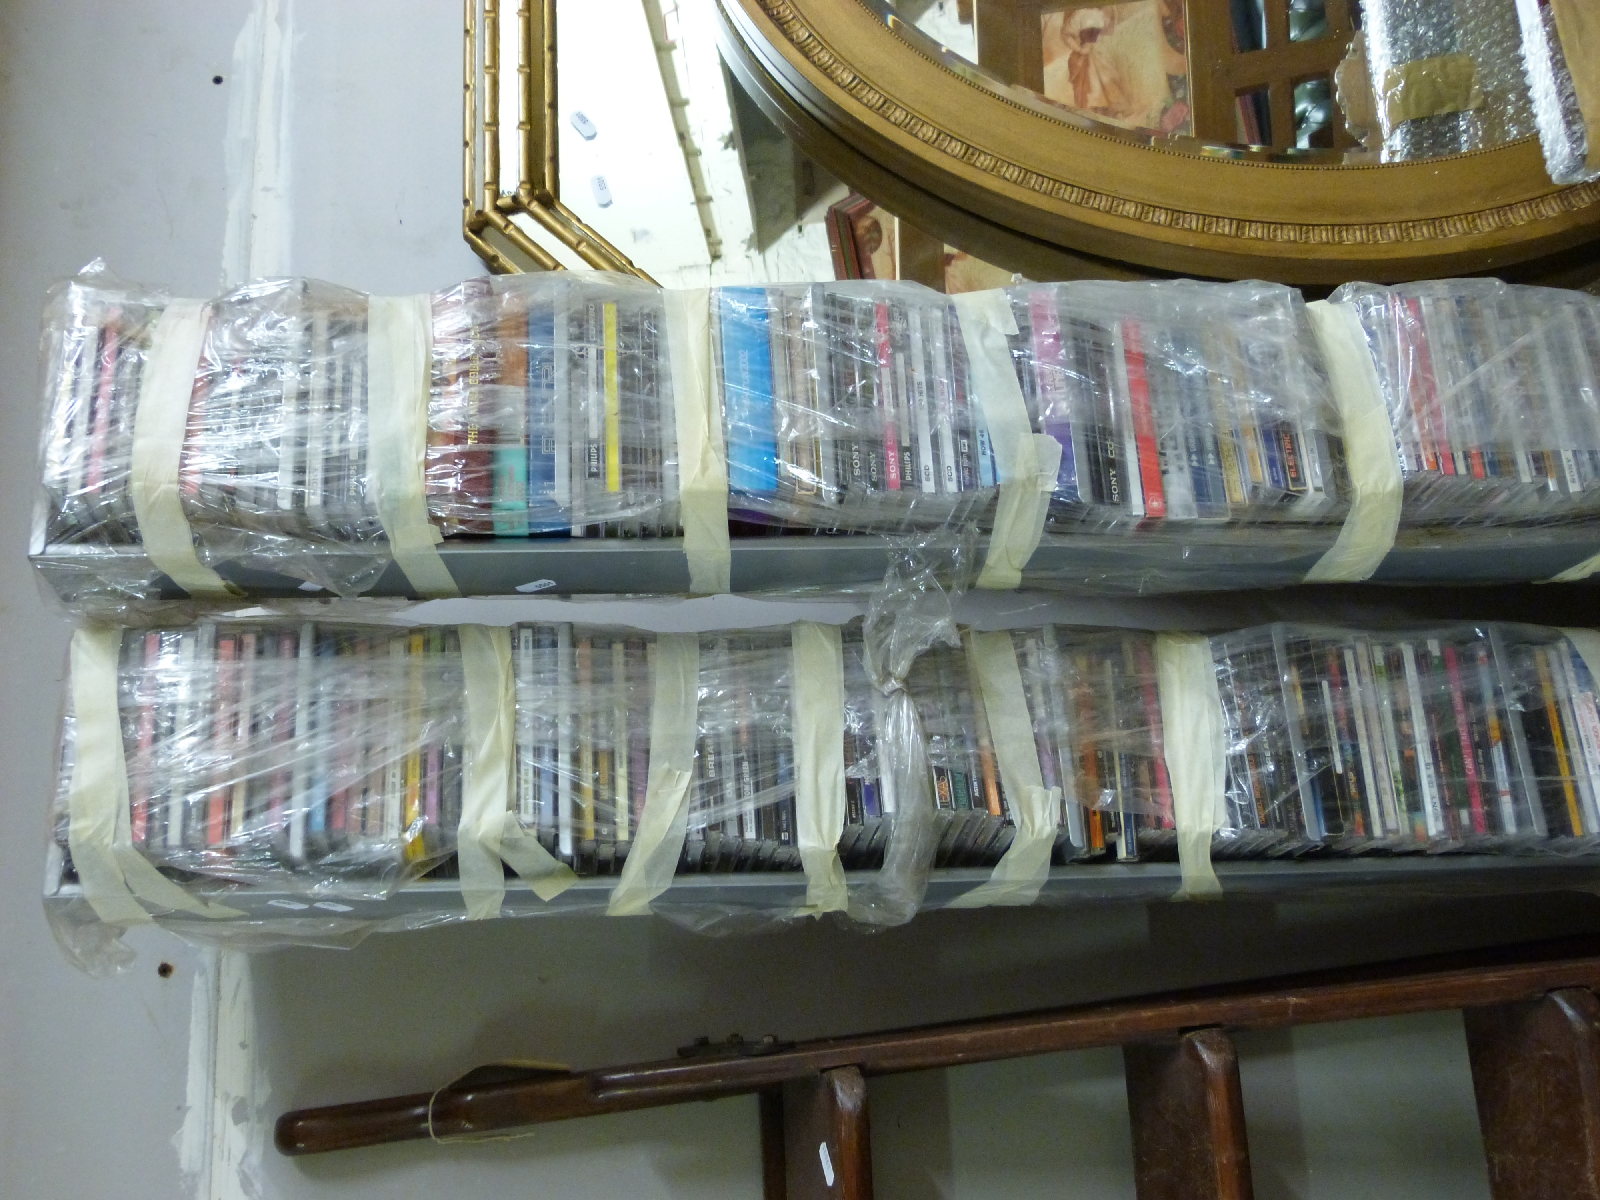 Two tower racks of CDs, mostly 80s/1990s/2000s,